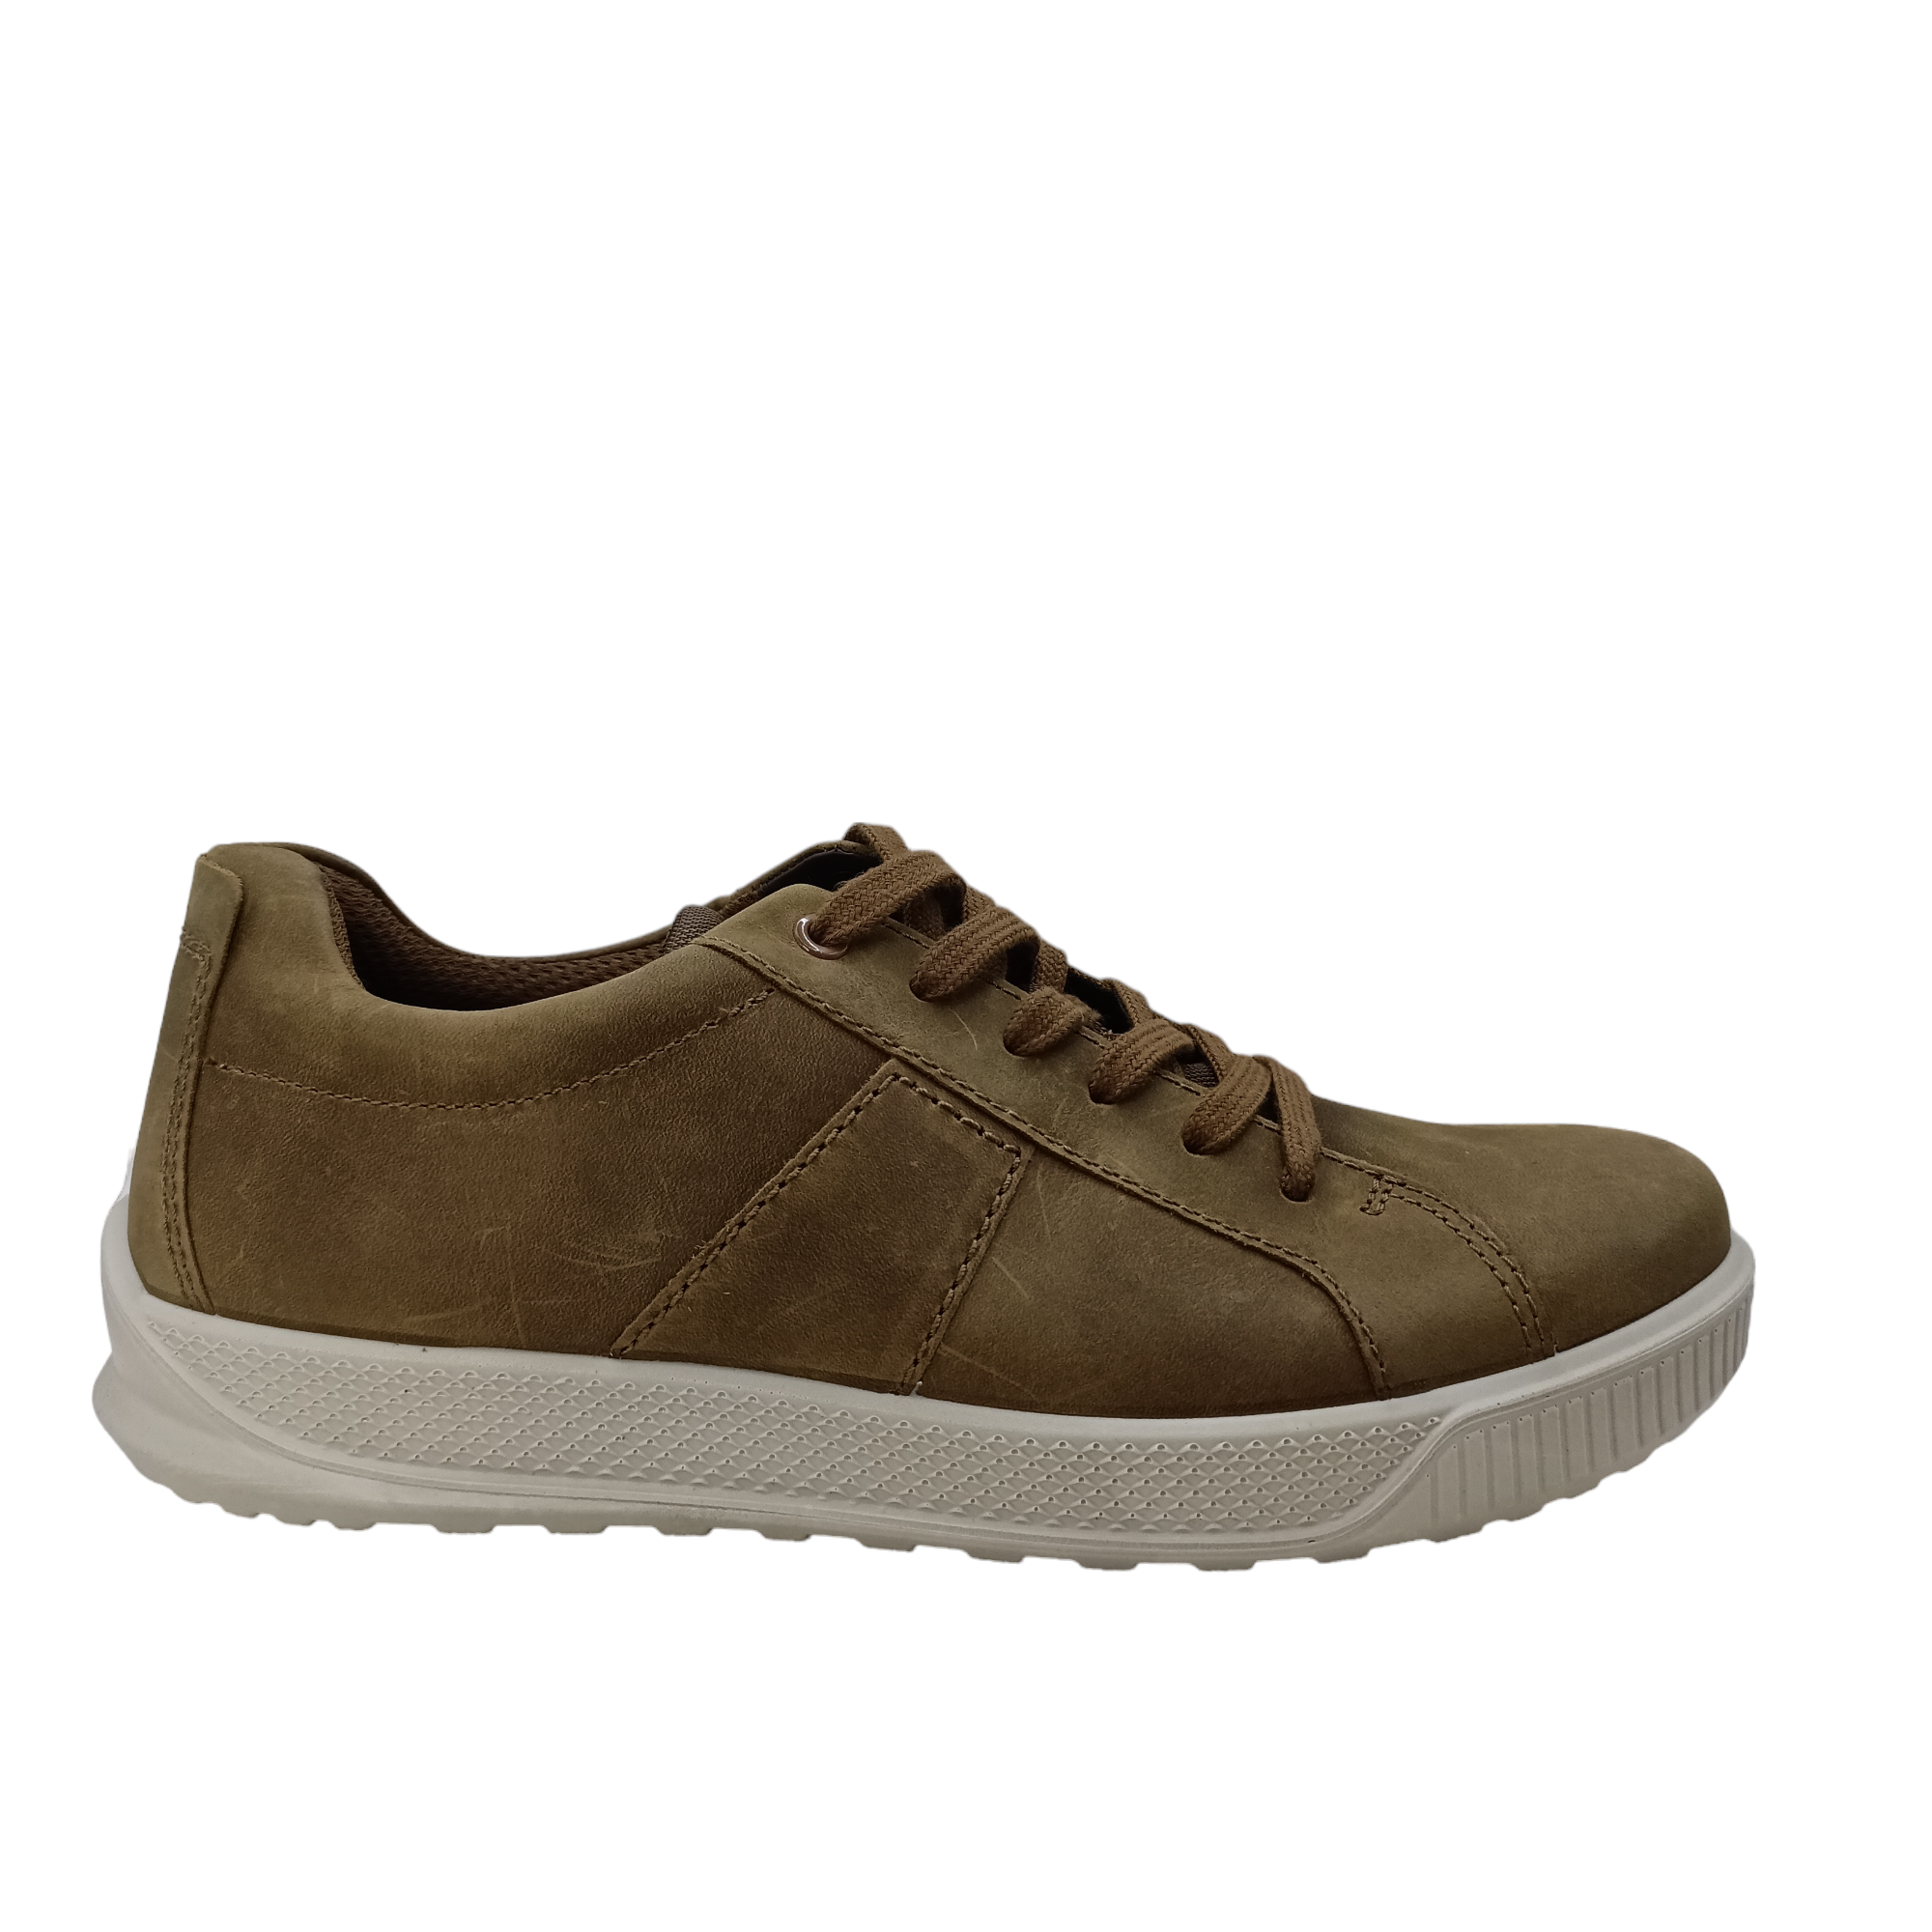 Shop Byway M - with shoe&me - from Ecco - Sneakers - Mens, Shoe, Sneakers, Winter